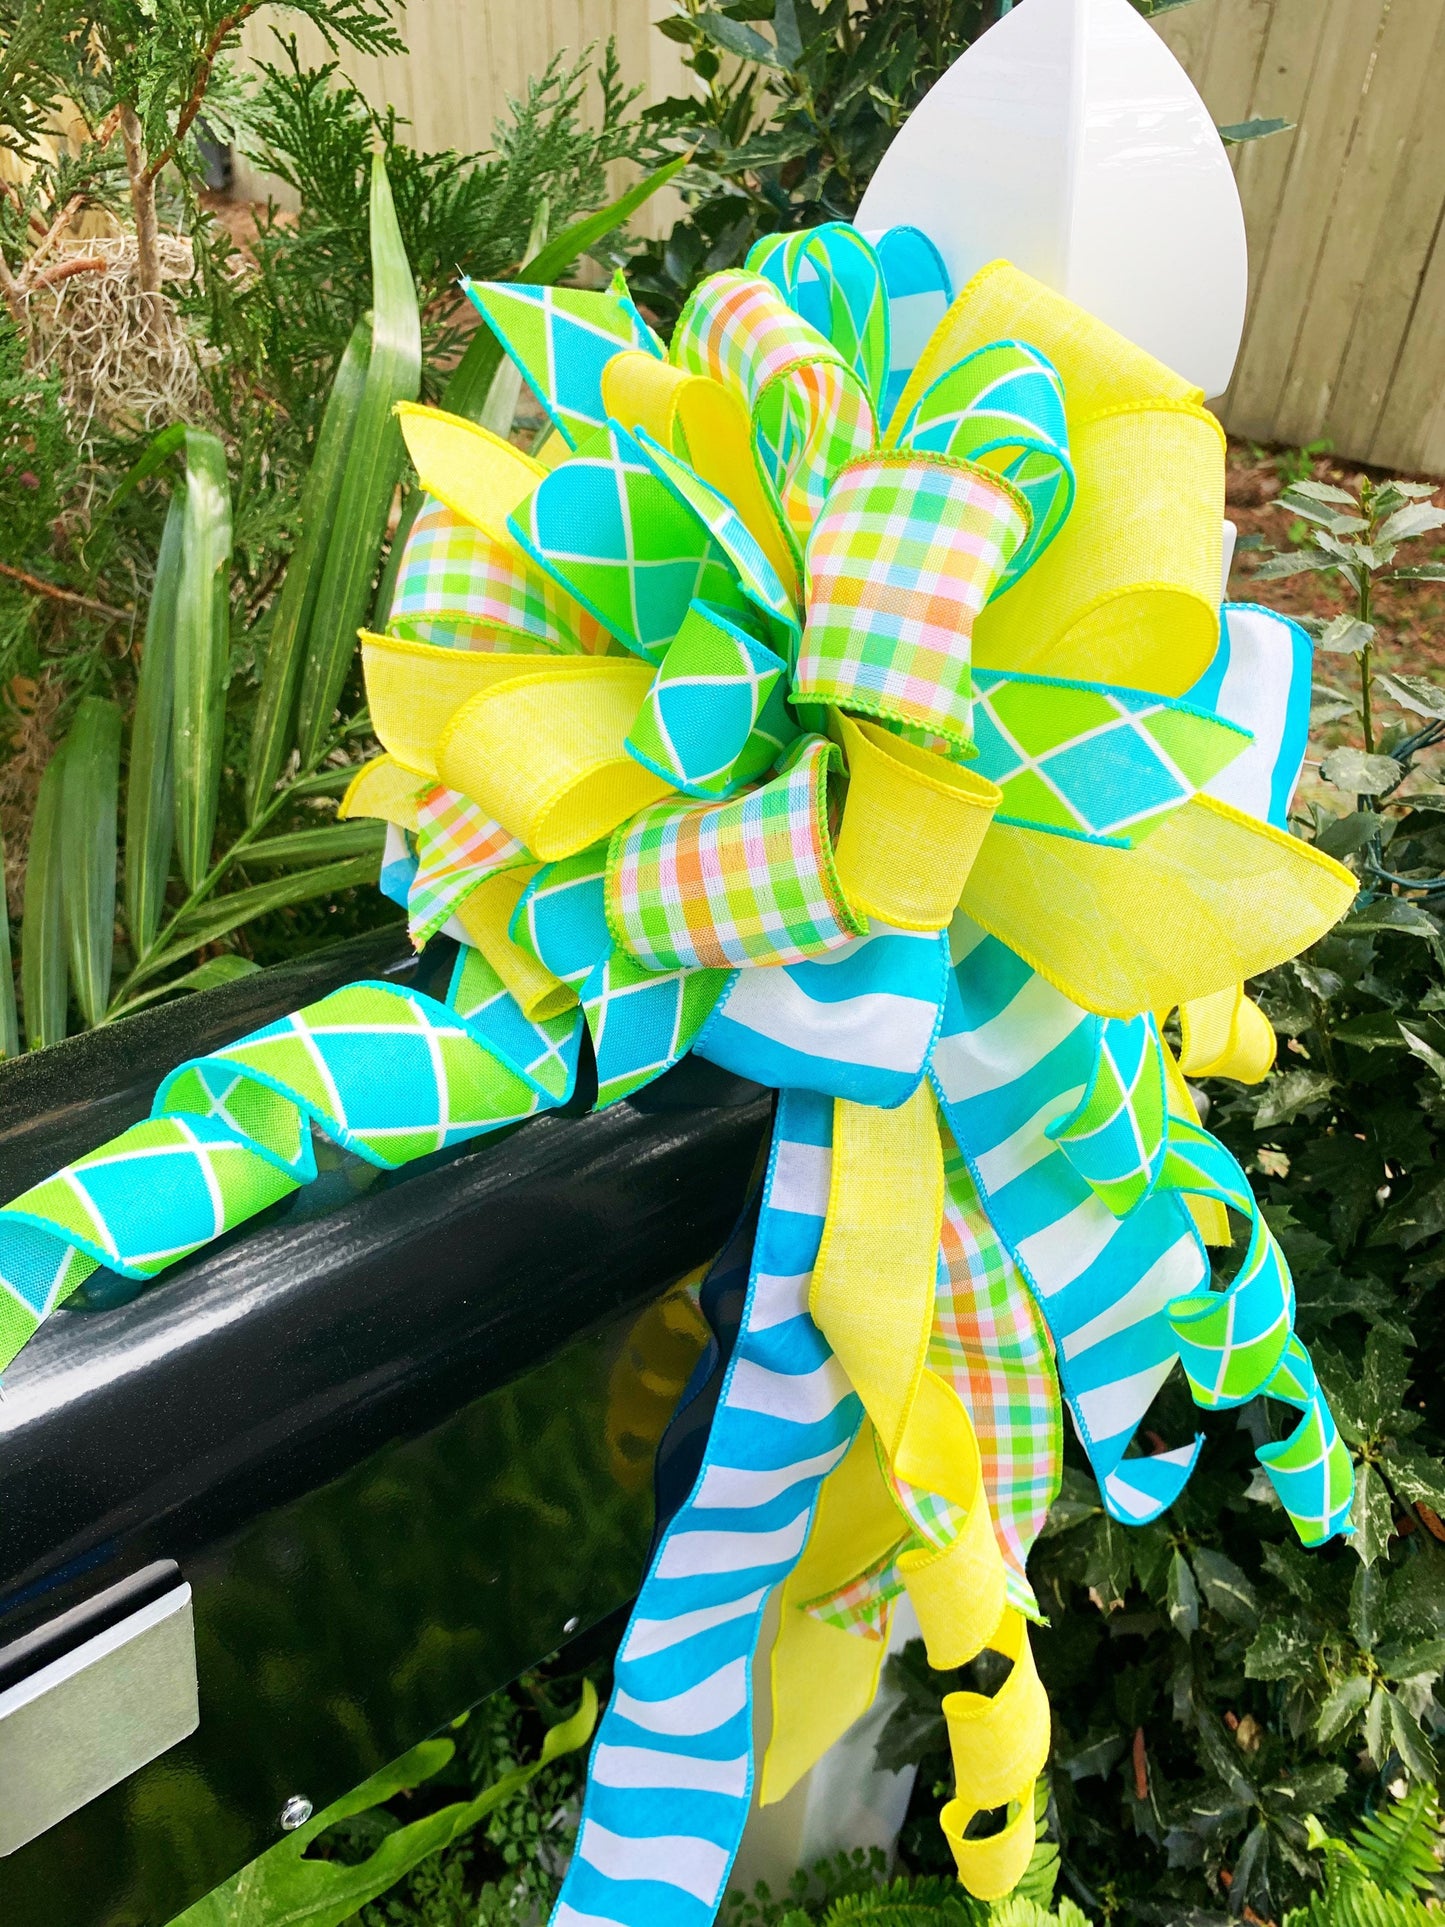 Everyday Collection - Spring, Spring Bow, Geometric, Geometric Bow, Geometric Ribbon, Large Bow, Bow, Mailbox Bow, Wreath Bow, Bows, Summer